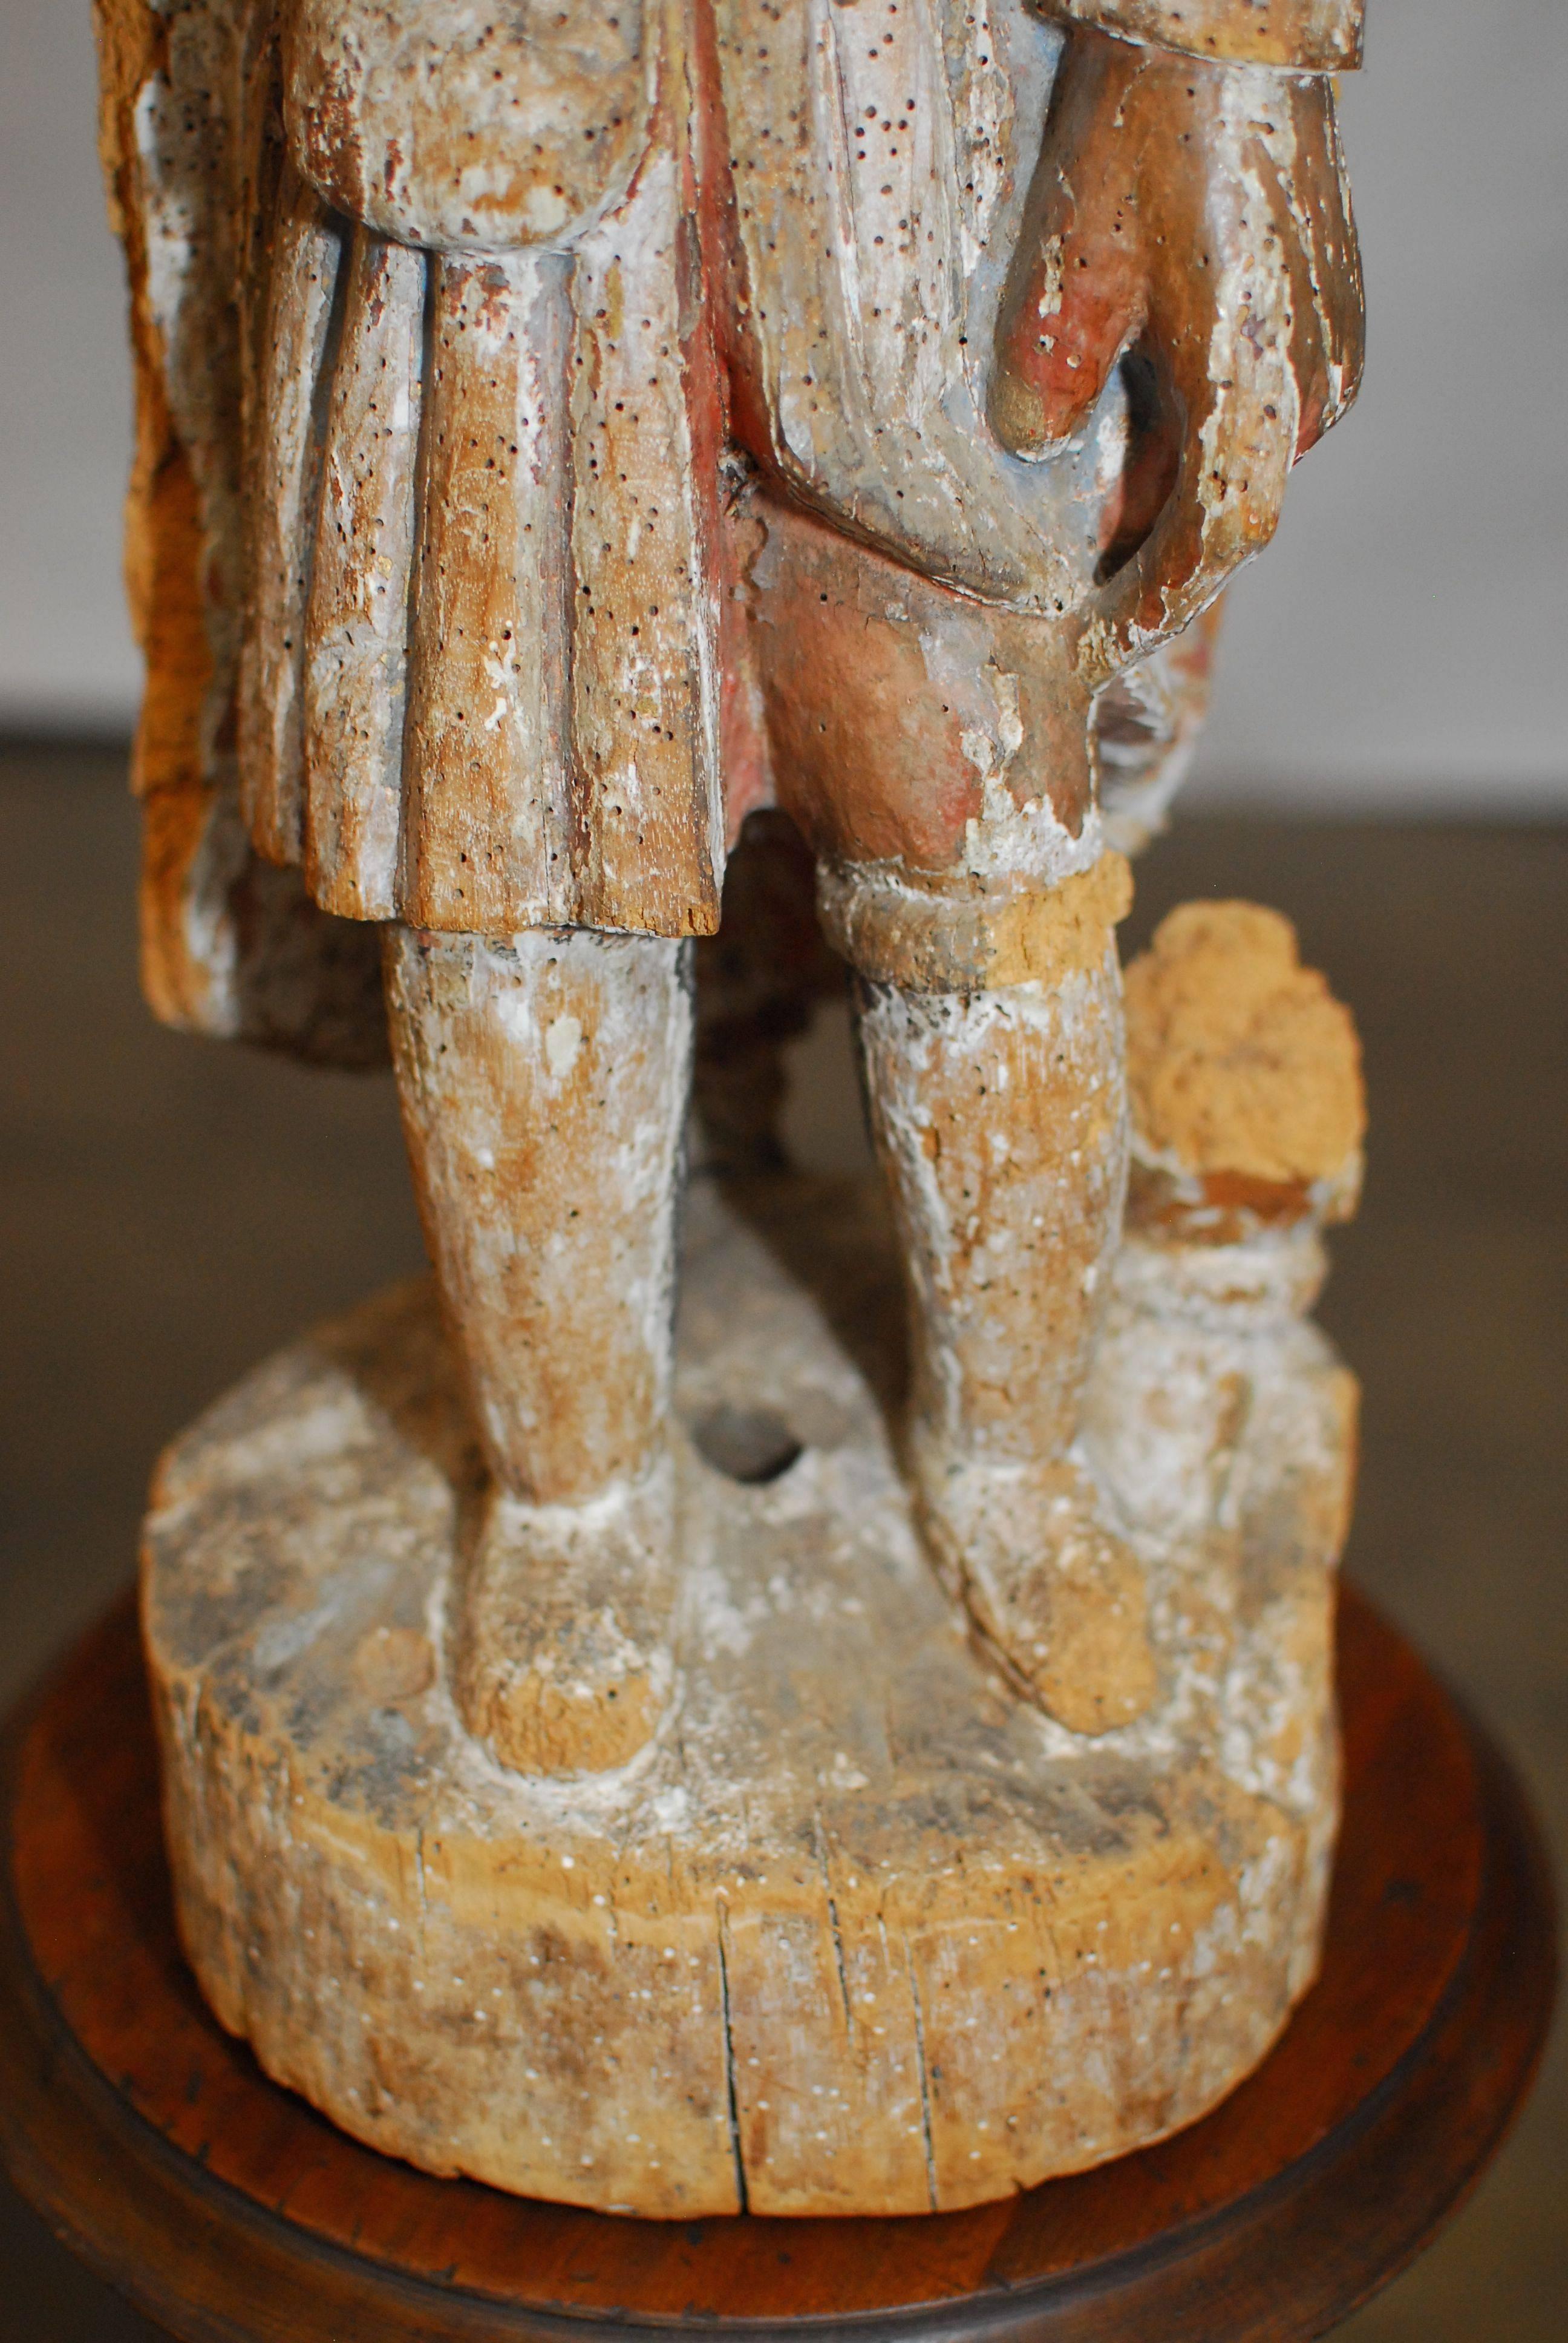 18th century polychromed wood folk art carving of a man depicted wearing a top hat and coat with some original color still visible. Minor losses and insect damage with age appropriate patina. Stands on a round wooden base. His right hand was